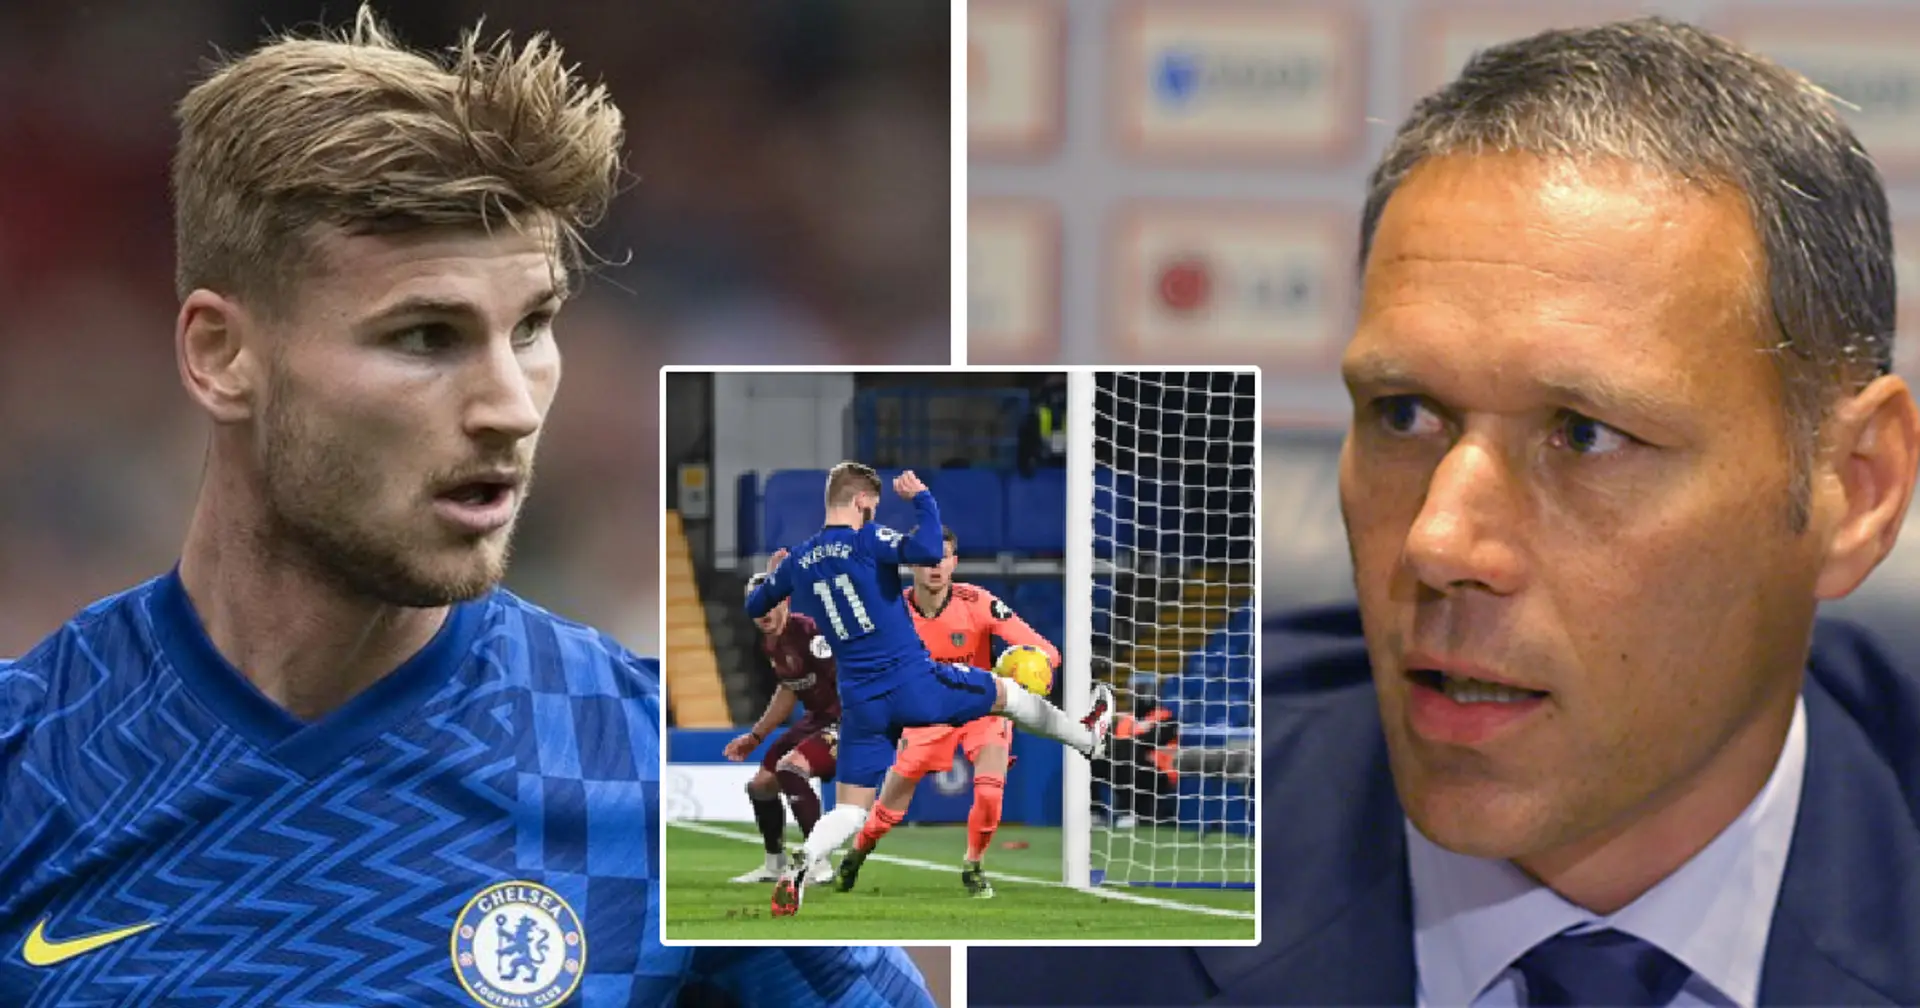 Marco van Basten: 'I was 18 times better than Werner -- he's just not good enough'